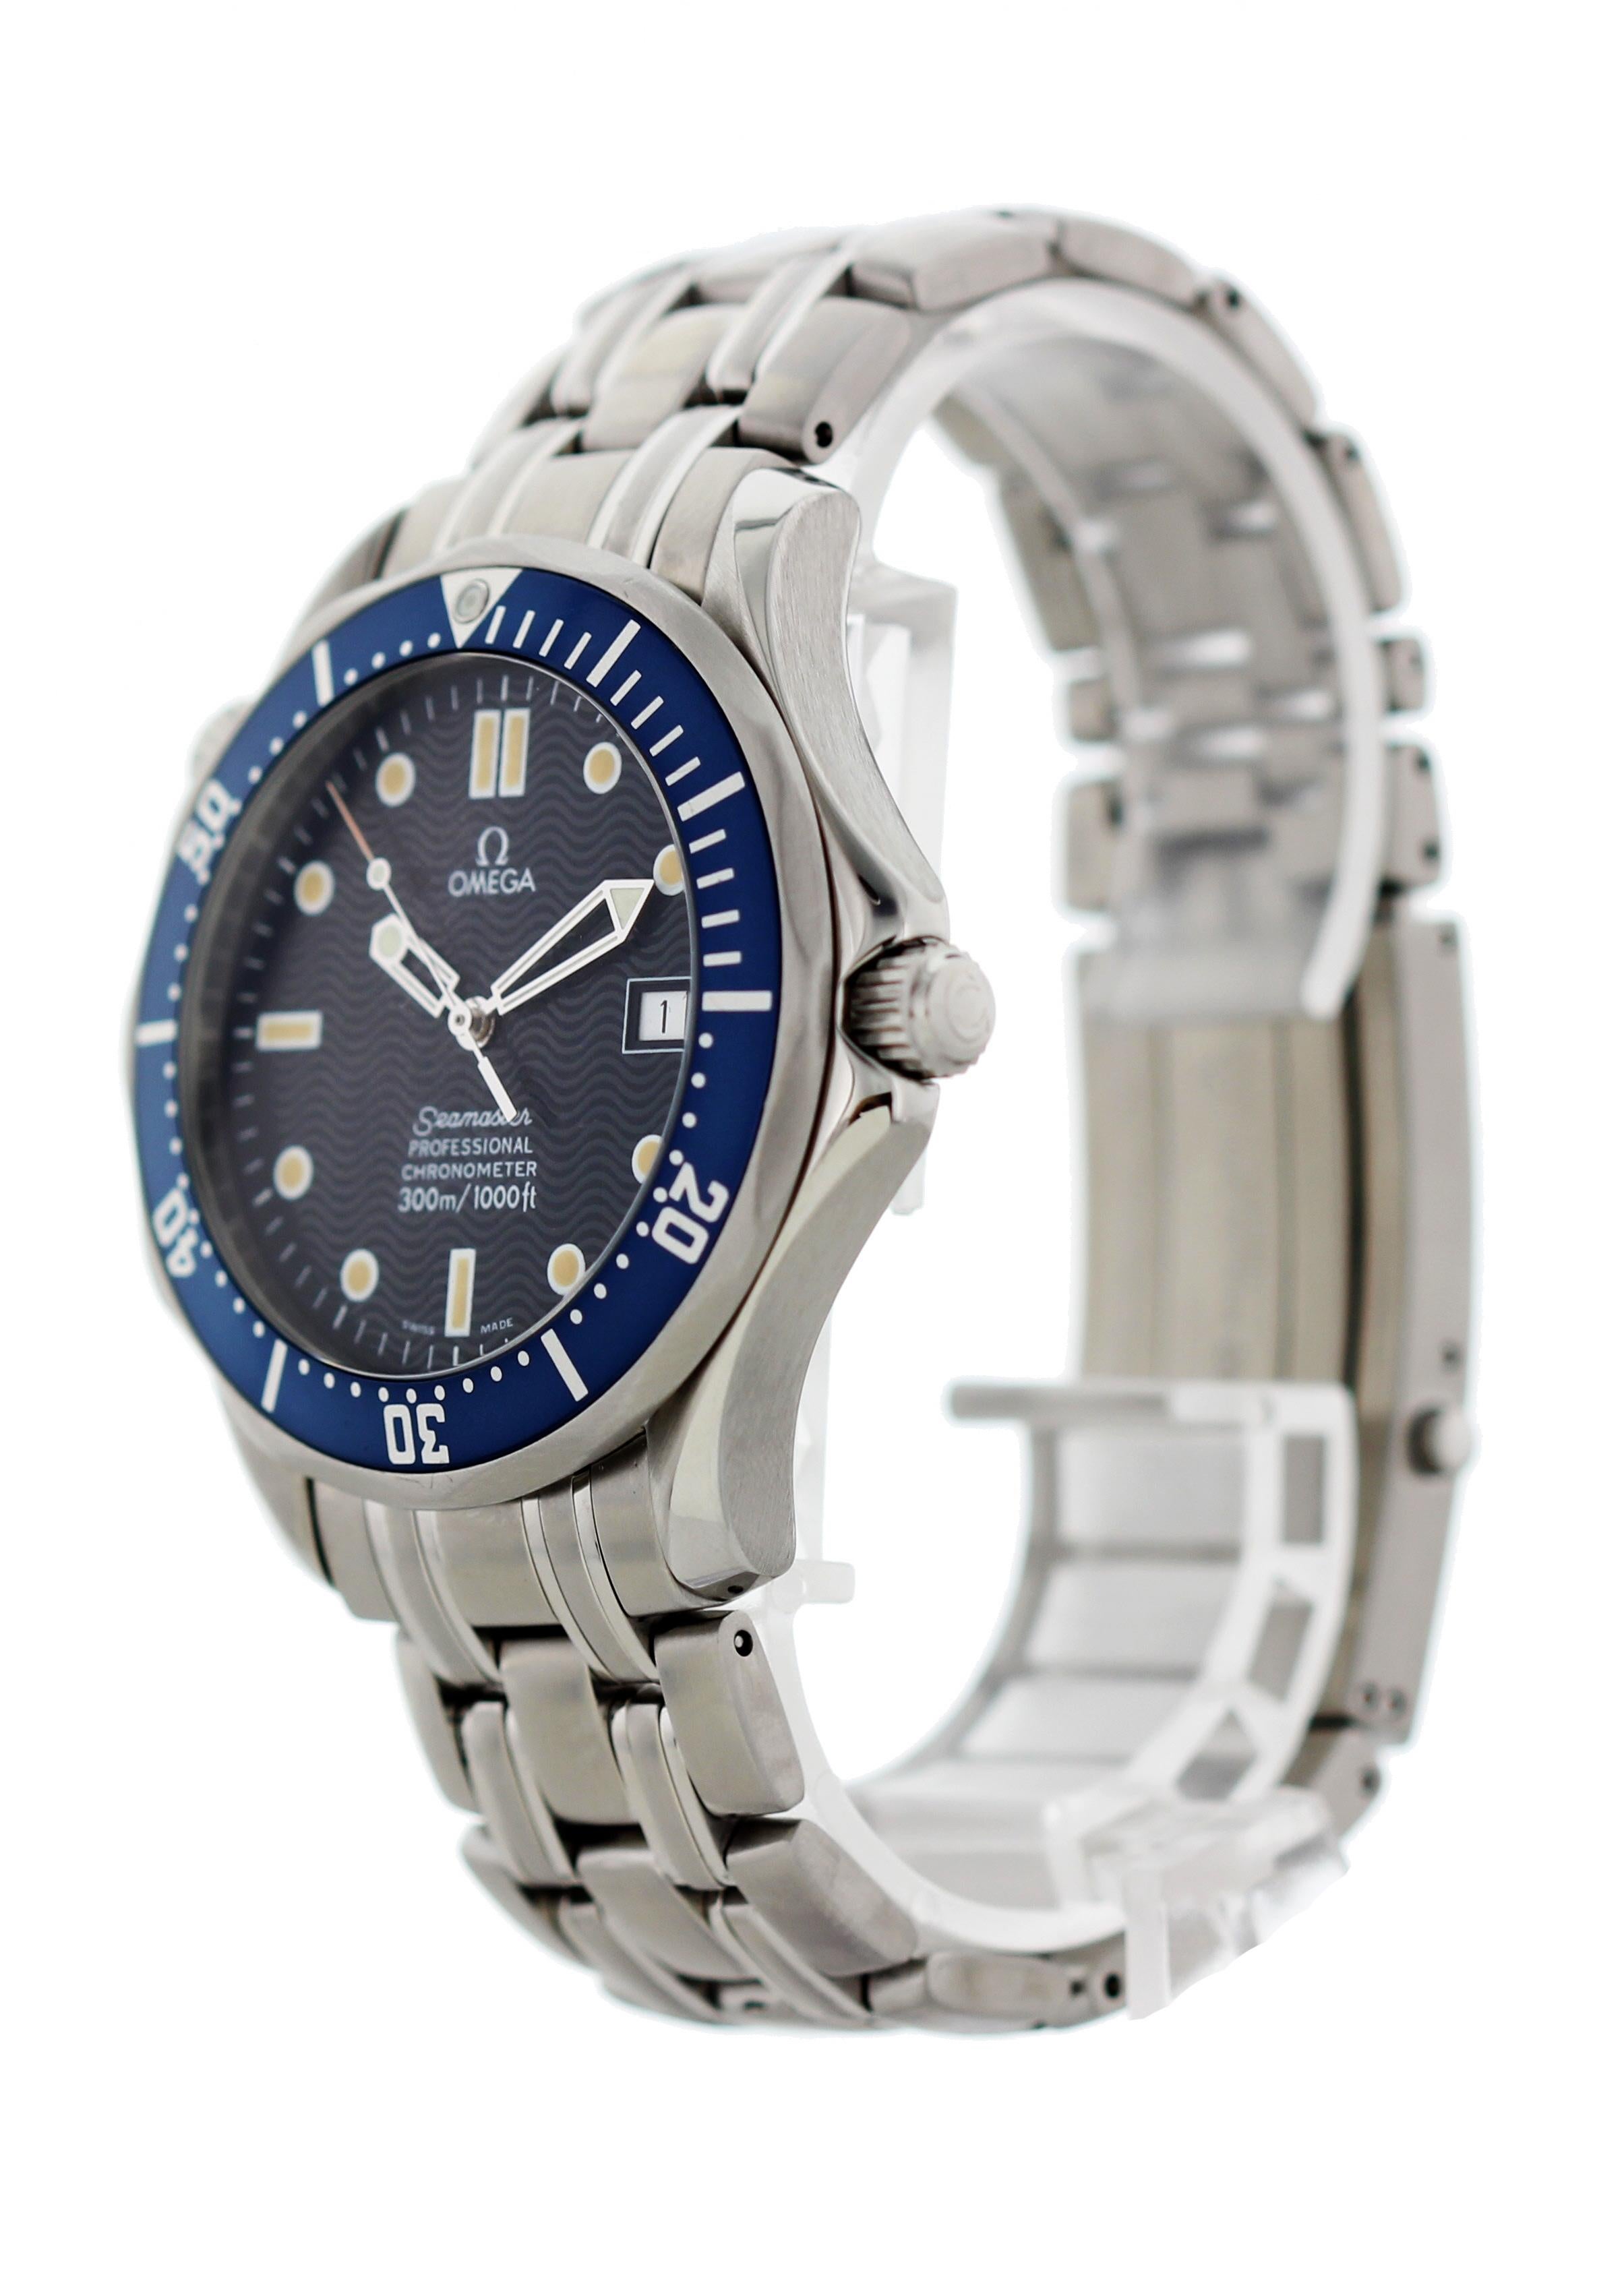 Omega Seamaster Professional Chronometer 2531.80.00 Mens Watch. 41mm stainless steel case. Unidirectional stainless steel bezel with a blue bezel insert and luminous 60-minute marker. Blue dial with steel luminous hands and luminous dot hour